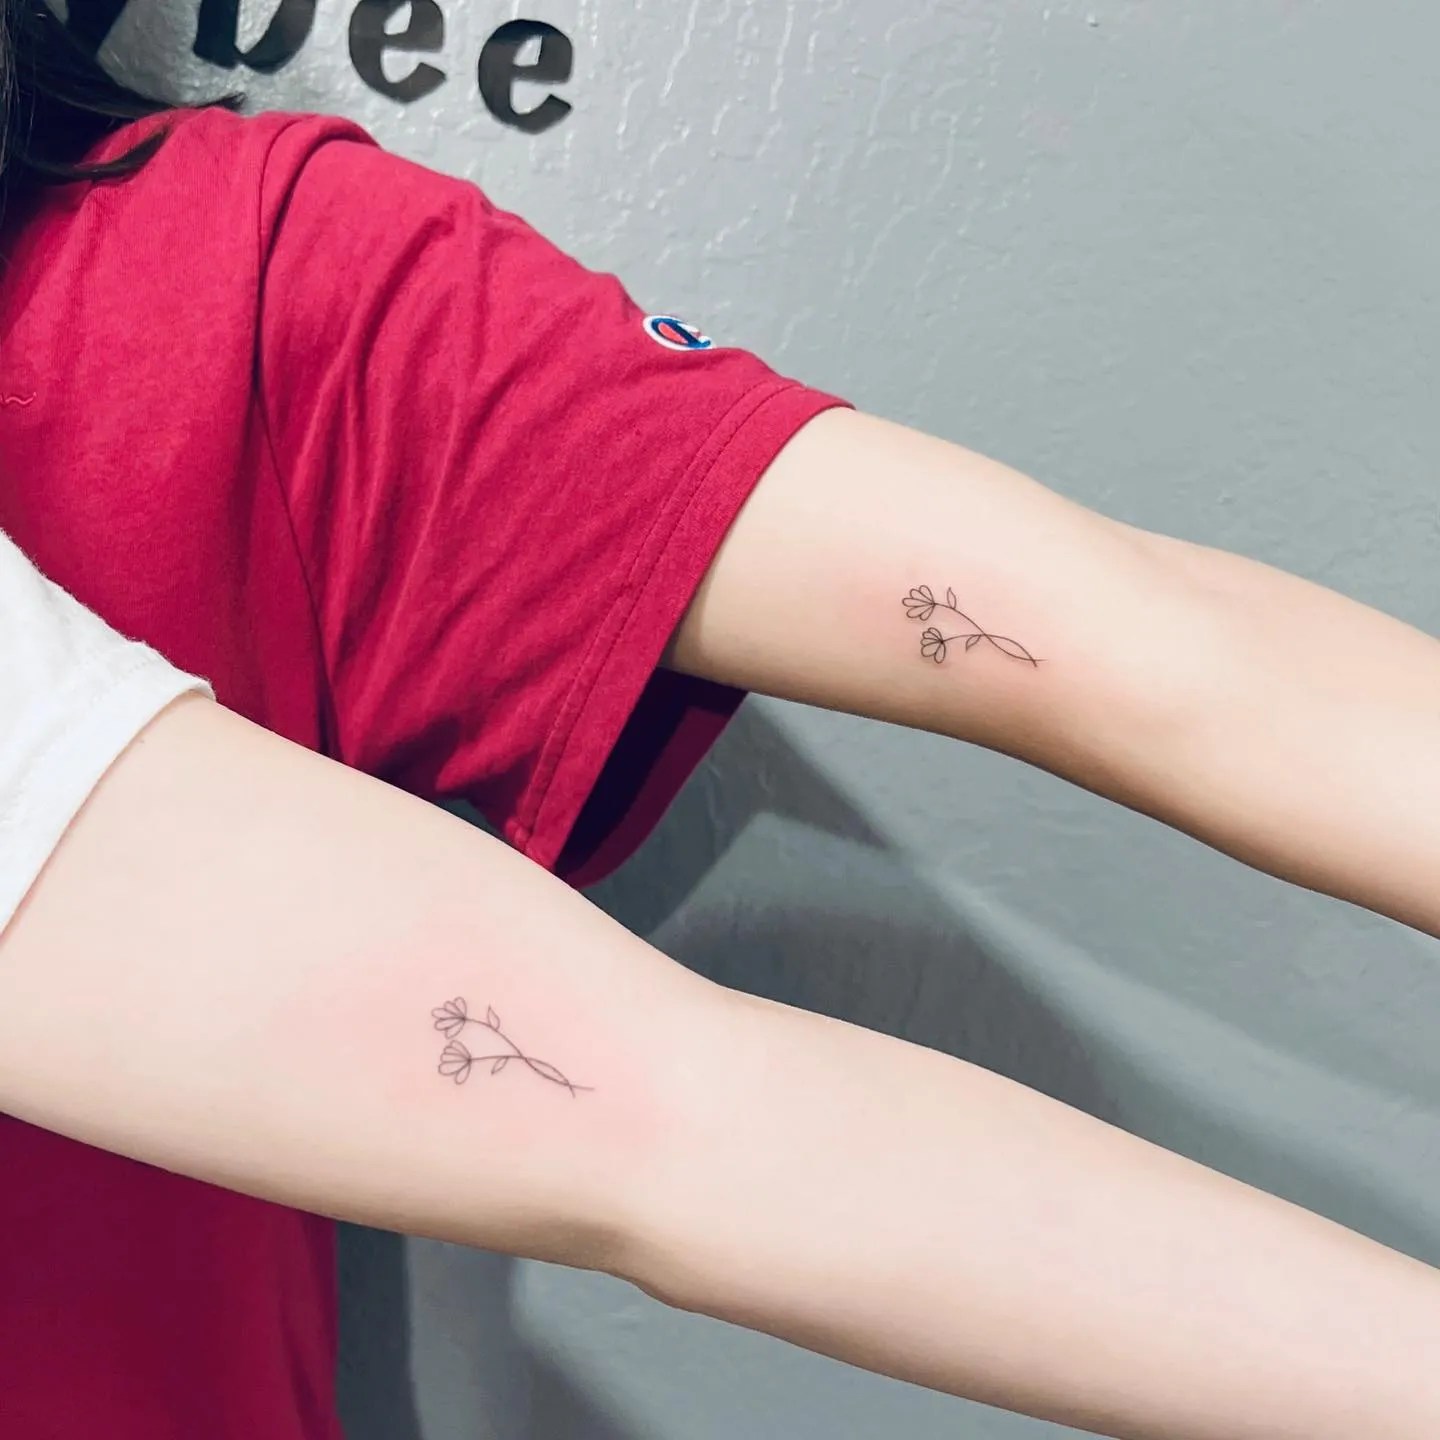 20 Small Couple Tattoo Ideas You Won't Regret Getting | Preview.ph